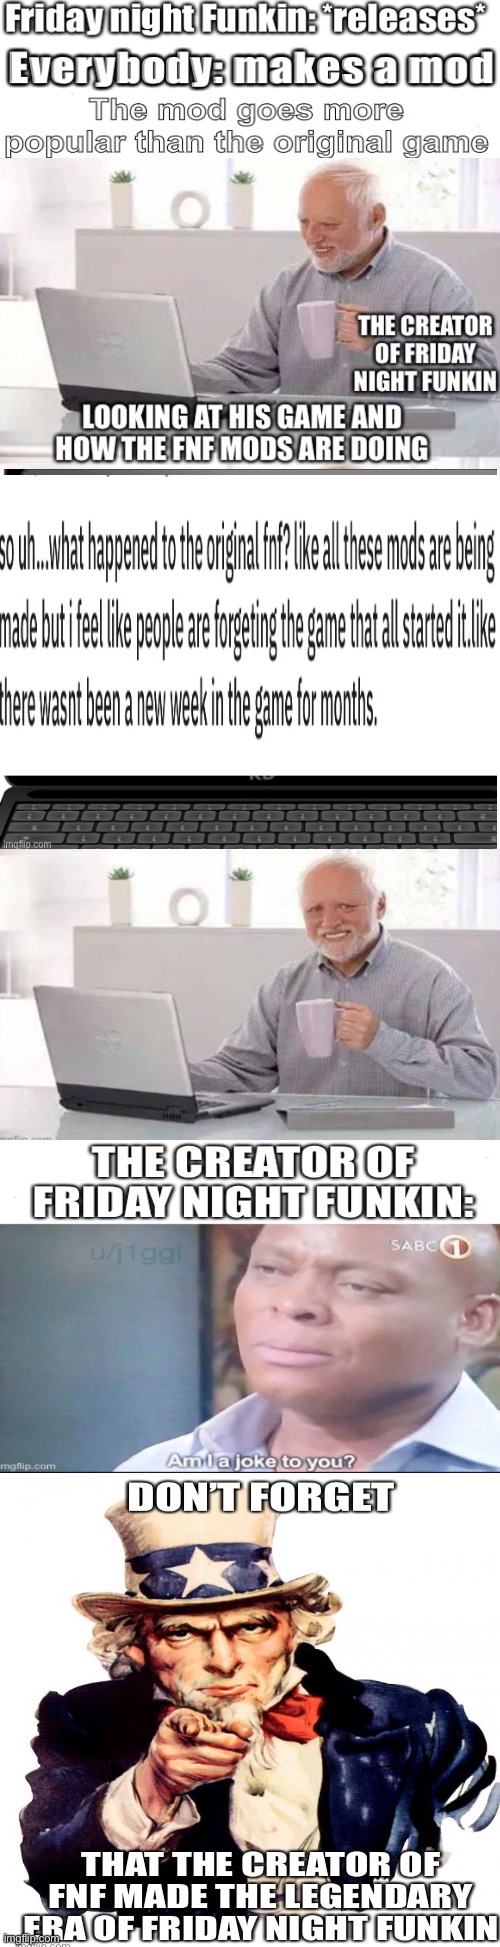 Don’t forget, the creator of fnf is legendary, that’s why we have all these fun fnf mods, respect to the creator ? | image tagged in memes,friday night funkin,remember,funny,true story,press f to pay respects | made w/ Imgflip meme maker